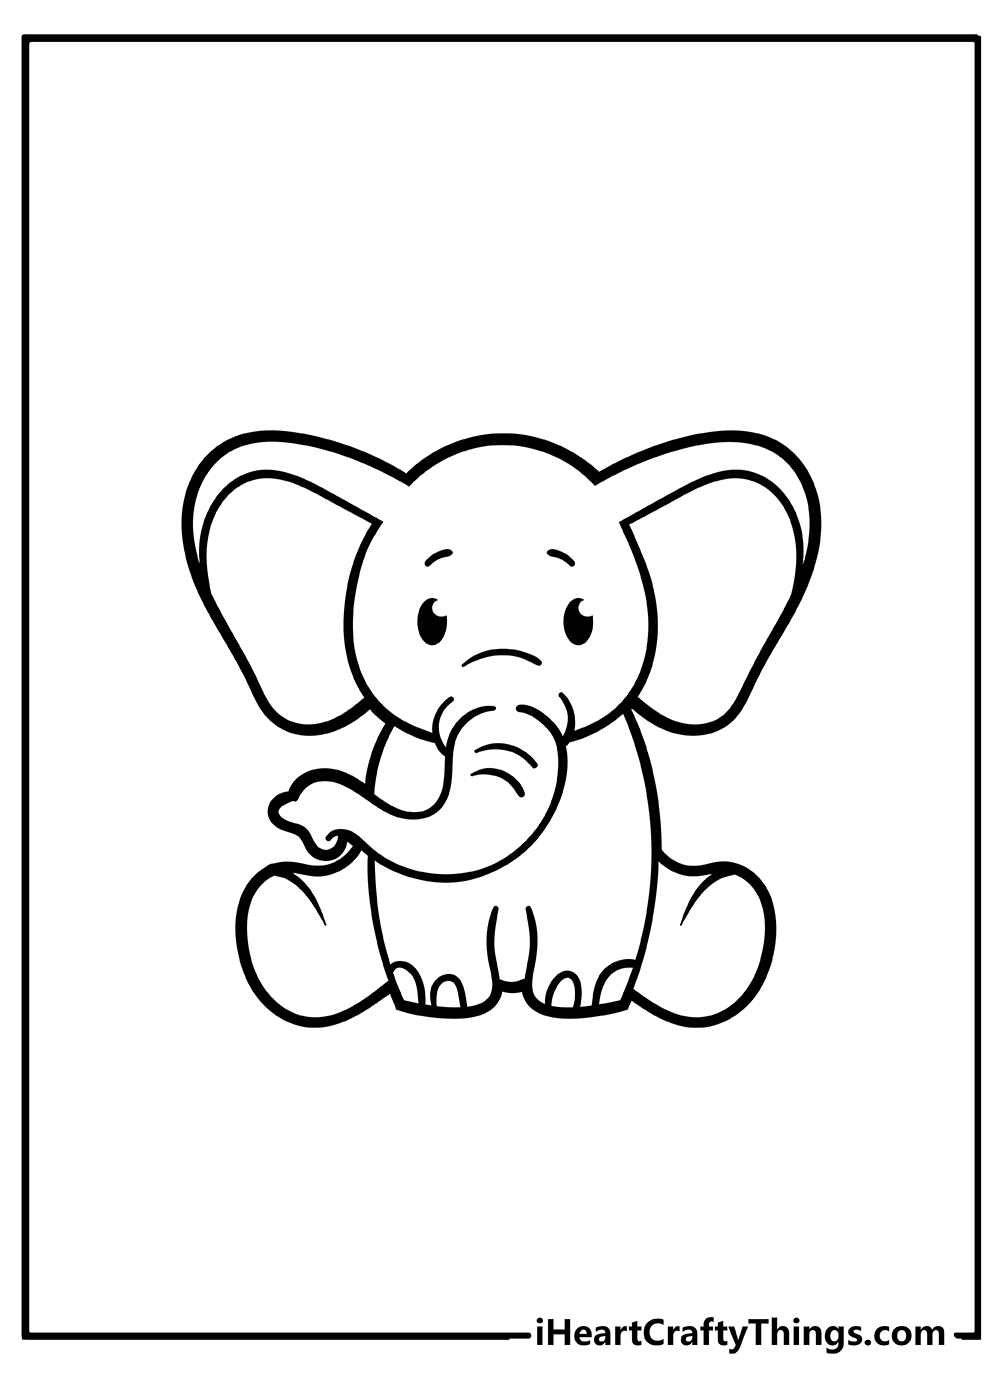 Printable Elephant Coloring Pages Updated 18